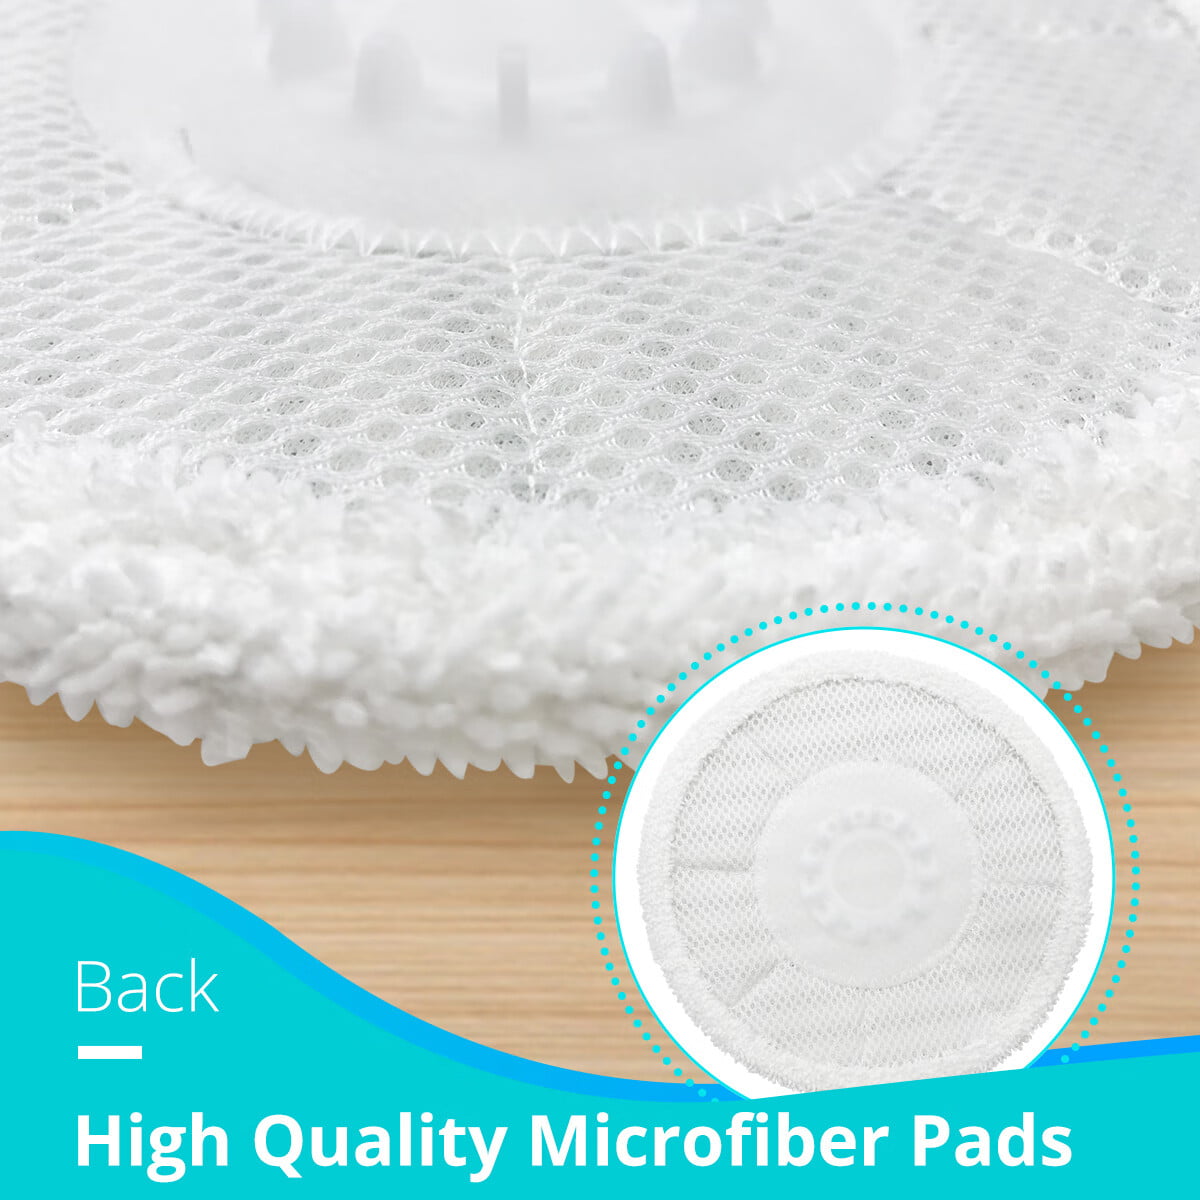 Vacushop Replacement Steam Mop Pads for Shark S7020 / S7000 S7001 Steam Mop, Reusable Steam & Scrub Cleaning Pads, Scrubbing and Sanitizing Rotating